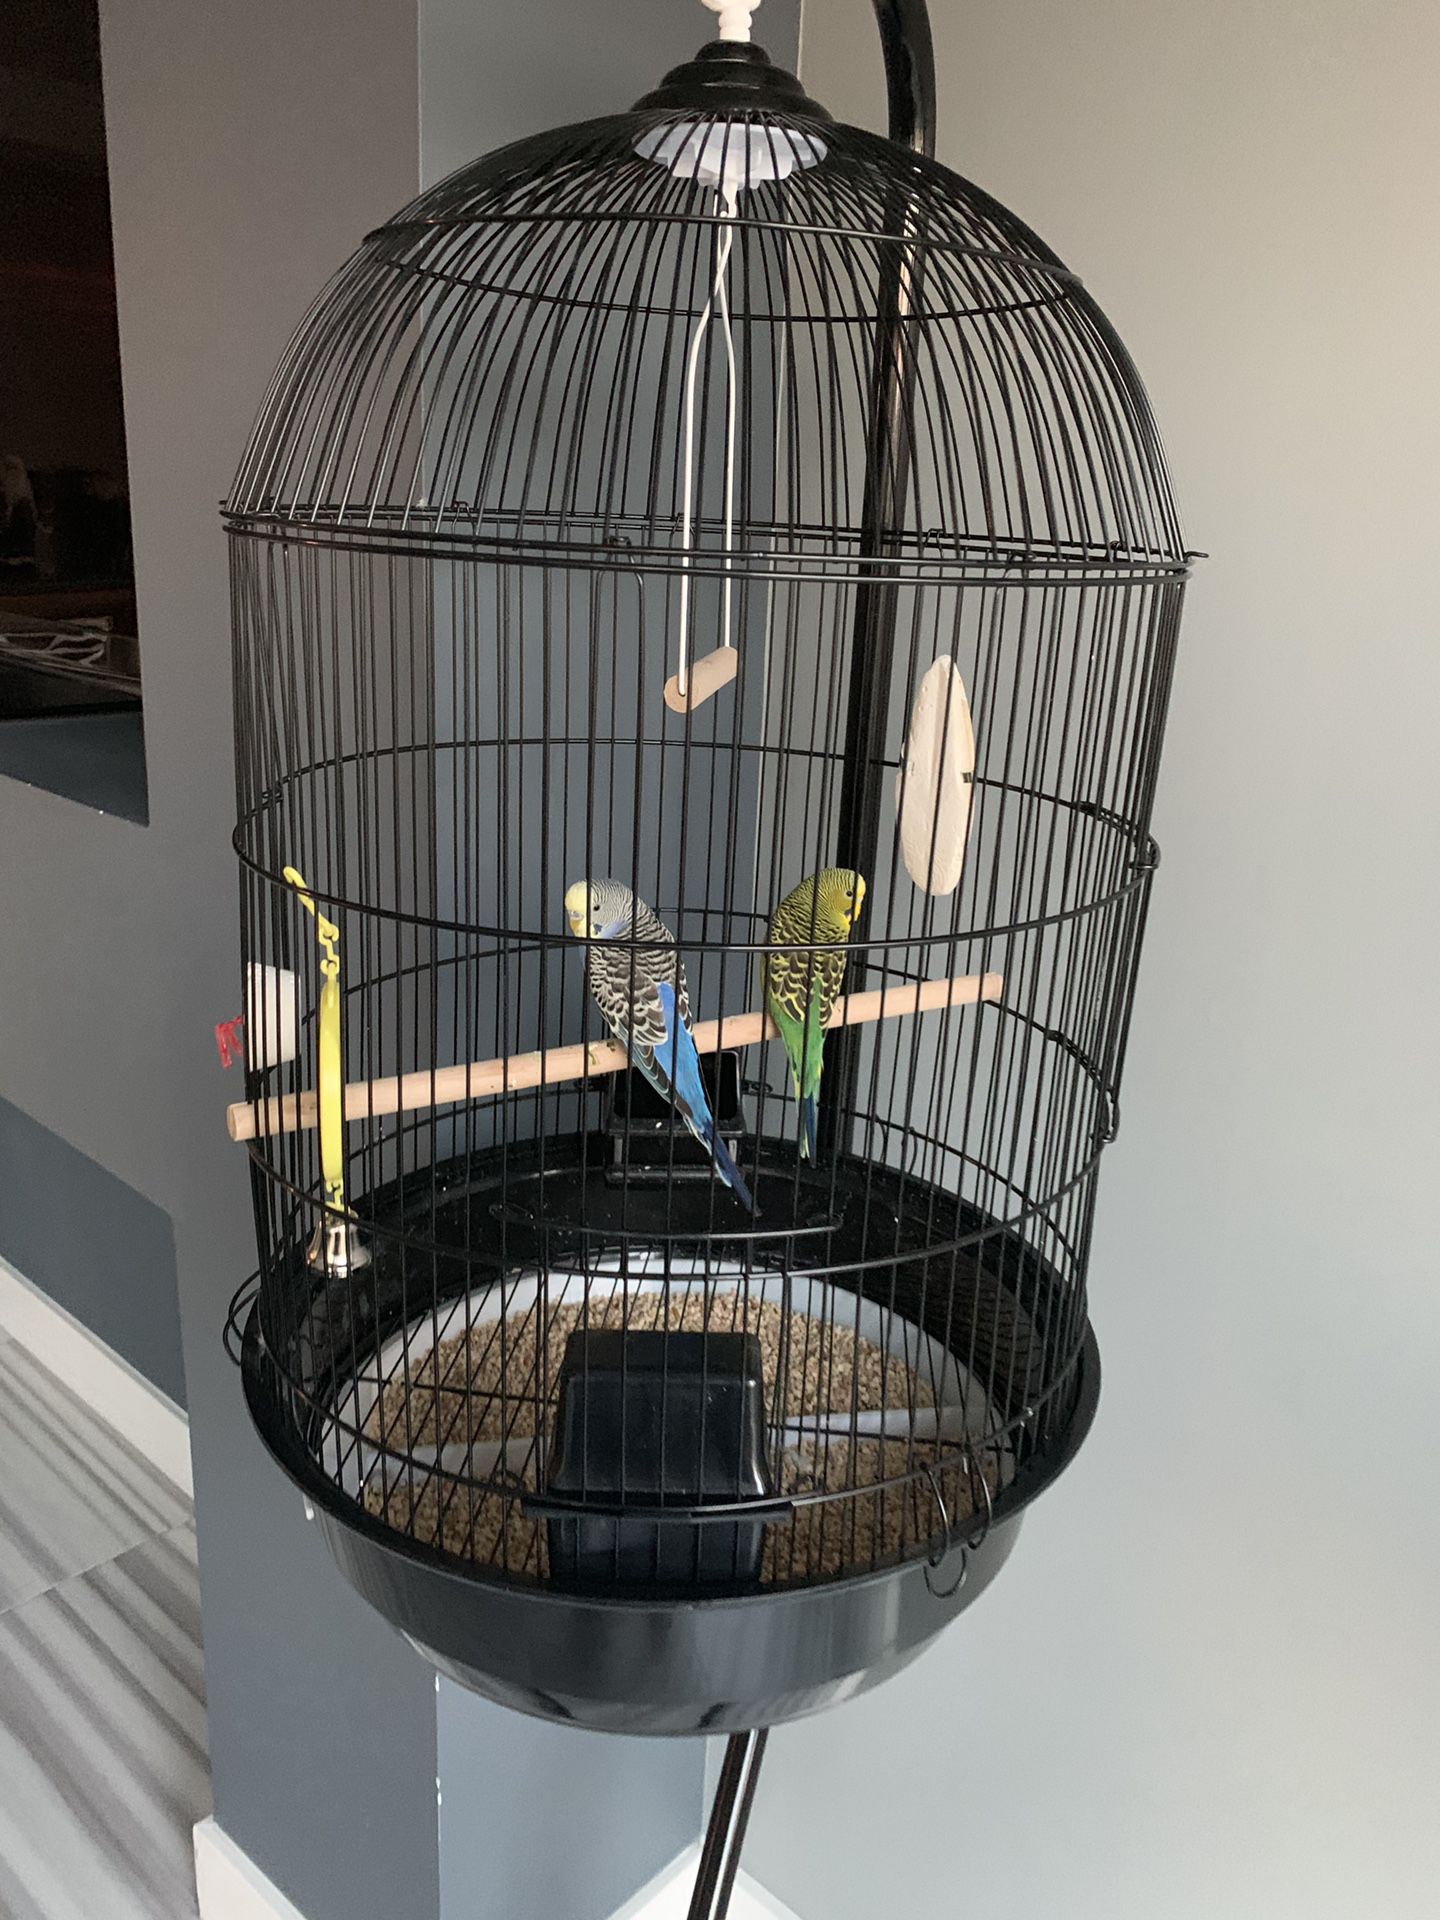 Hanging Bird Cage (birds not included)